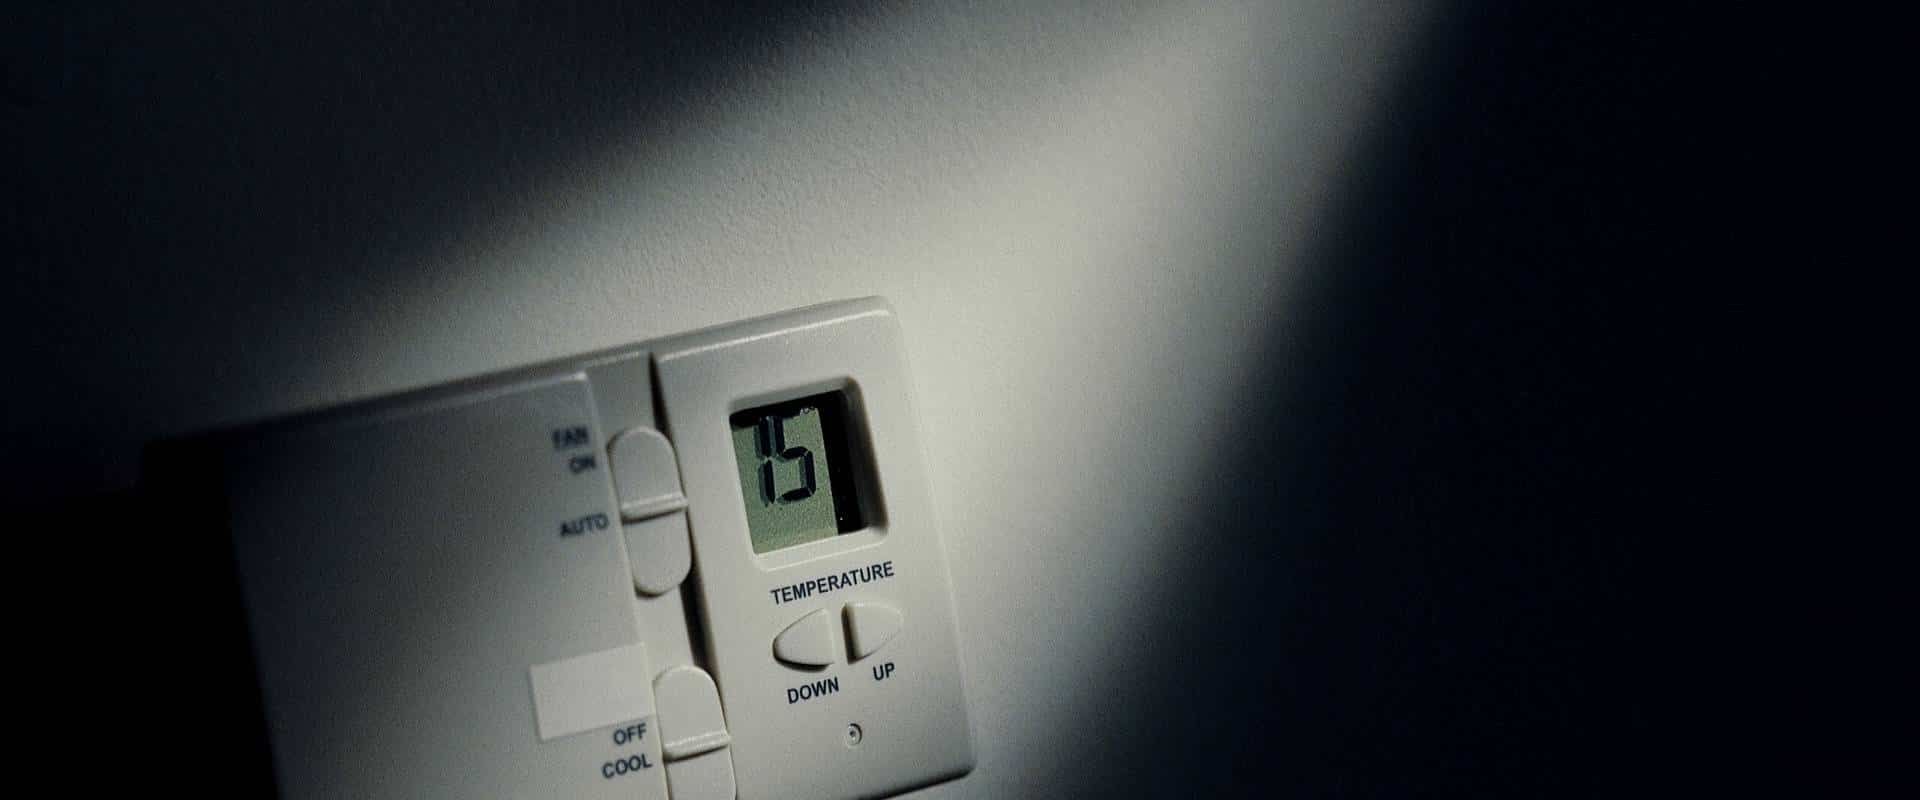 Save almost £1,000: 5 lesser-known energy saving measures